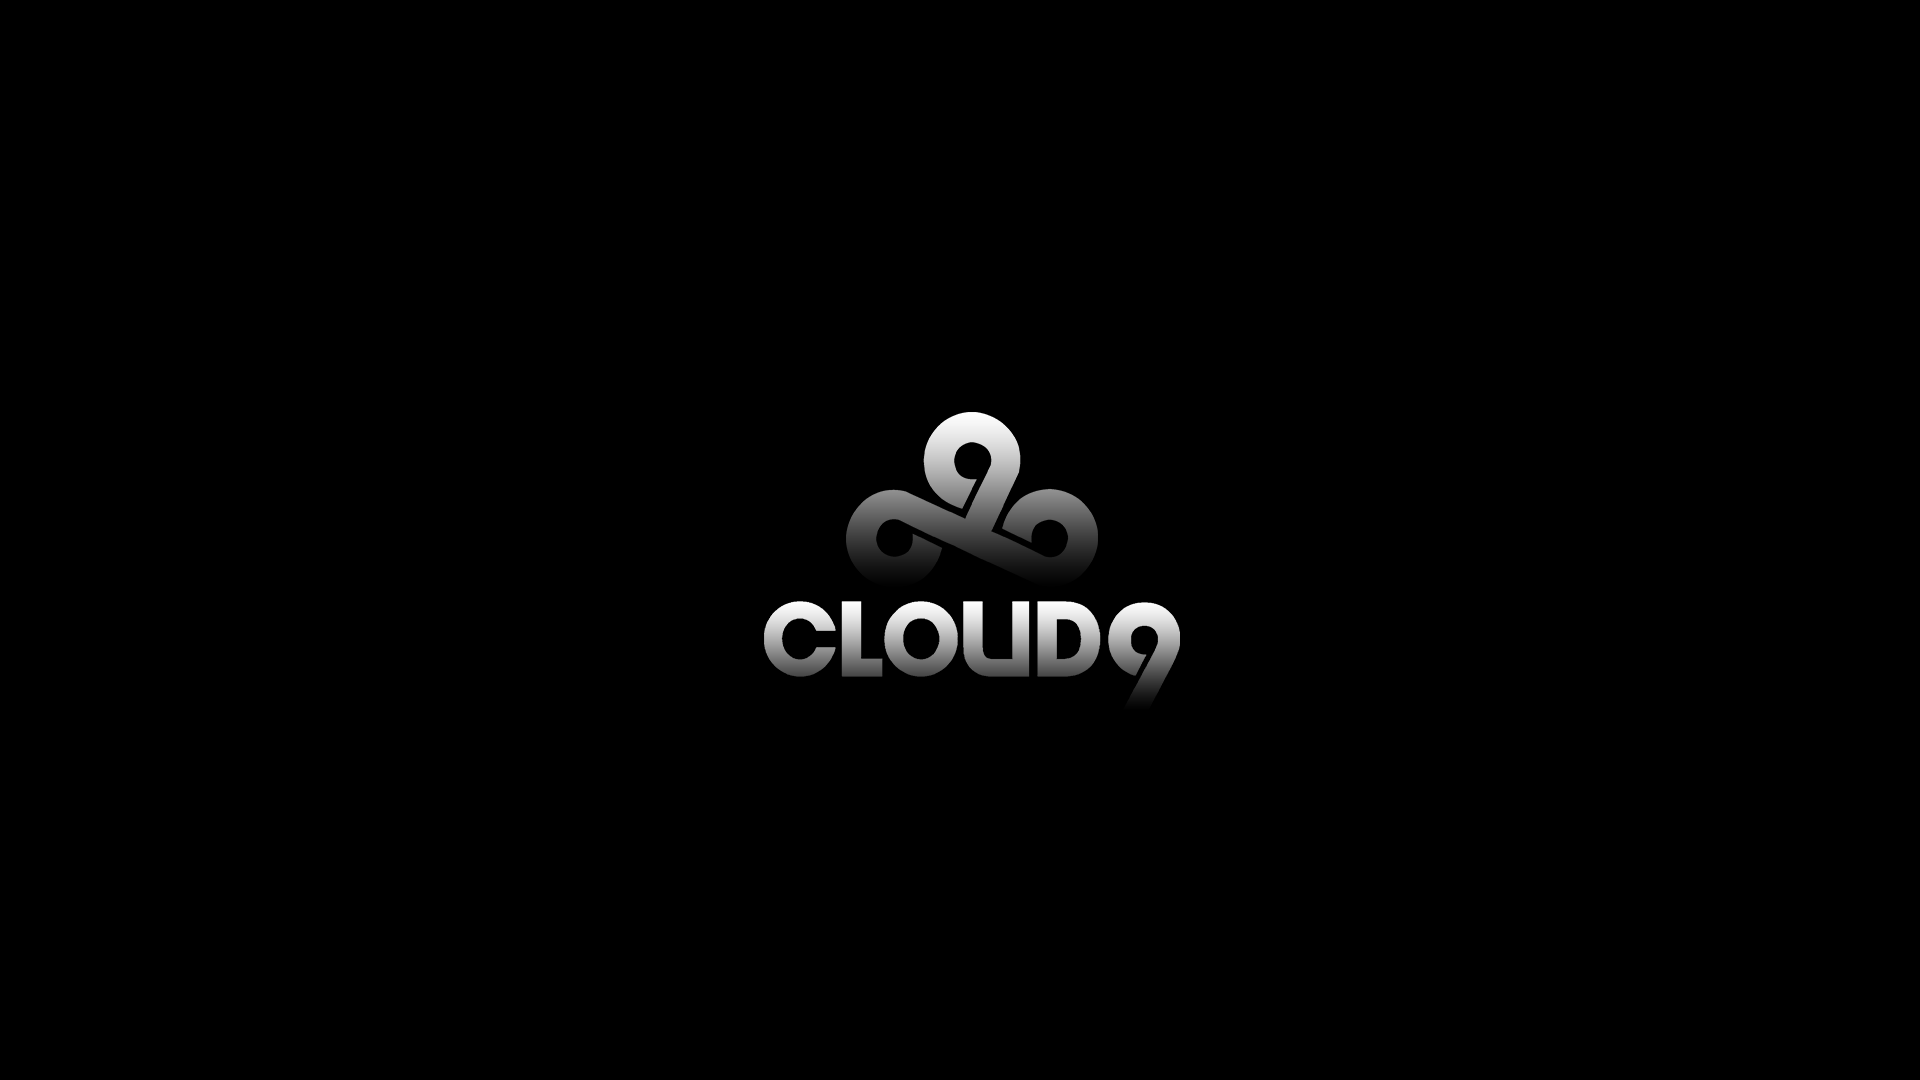 C9 Wallpaper I made! (1920x1080) Need #iPhone S #Plus #Wallpaper/ #Background for #IPhone6SPlus? Follow iPhone 6S Plus. iPhone 6 s plus, Background s, Wallpaper